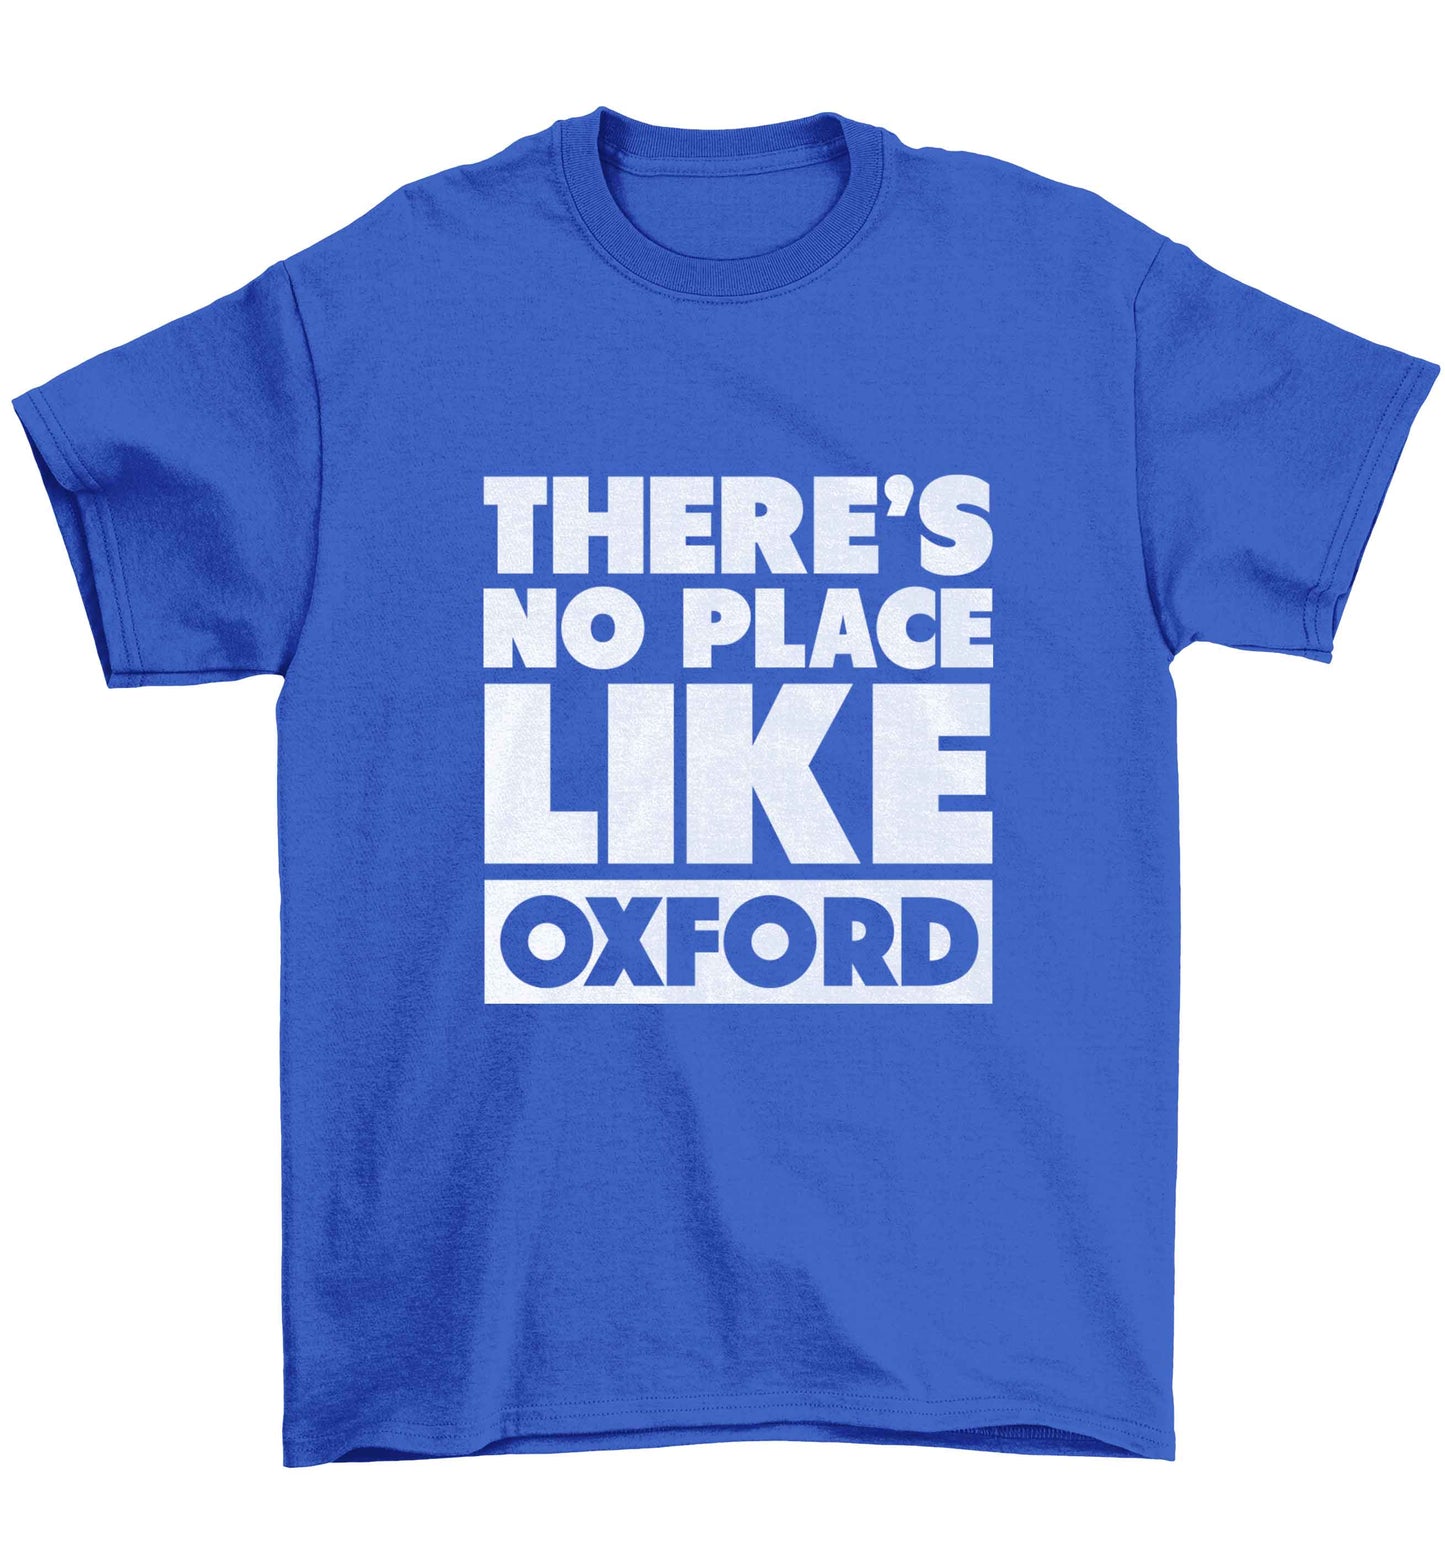 There's no place like Oxford Children's blue Tshirt 12-13 Years